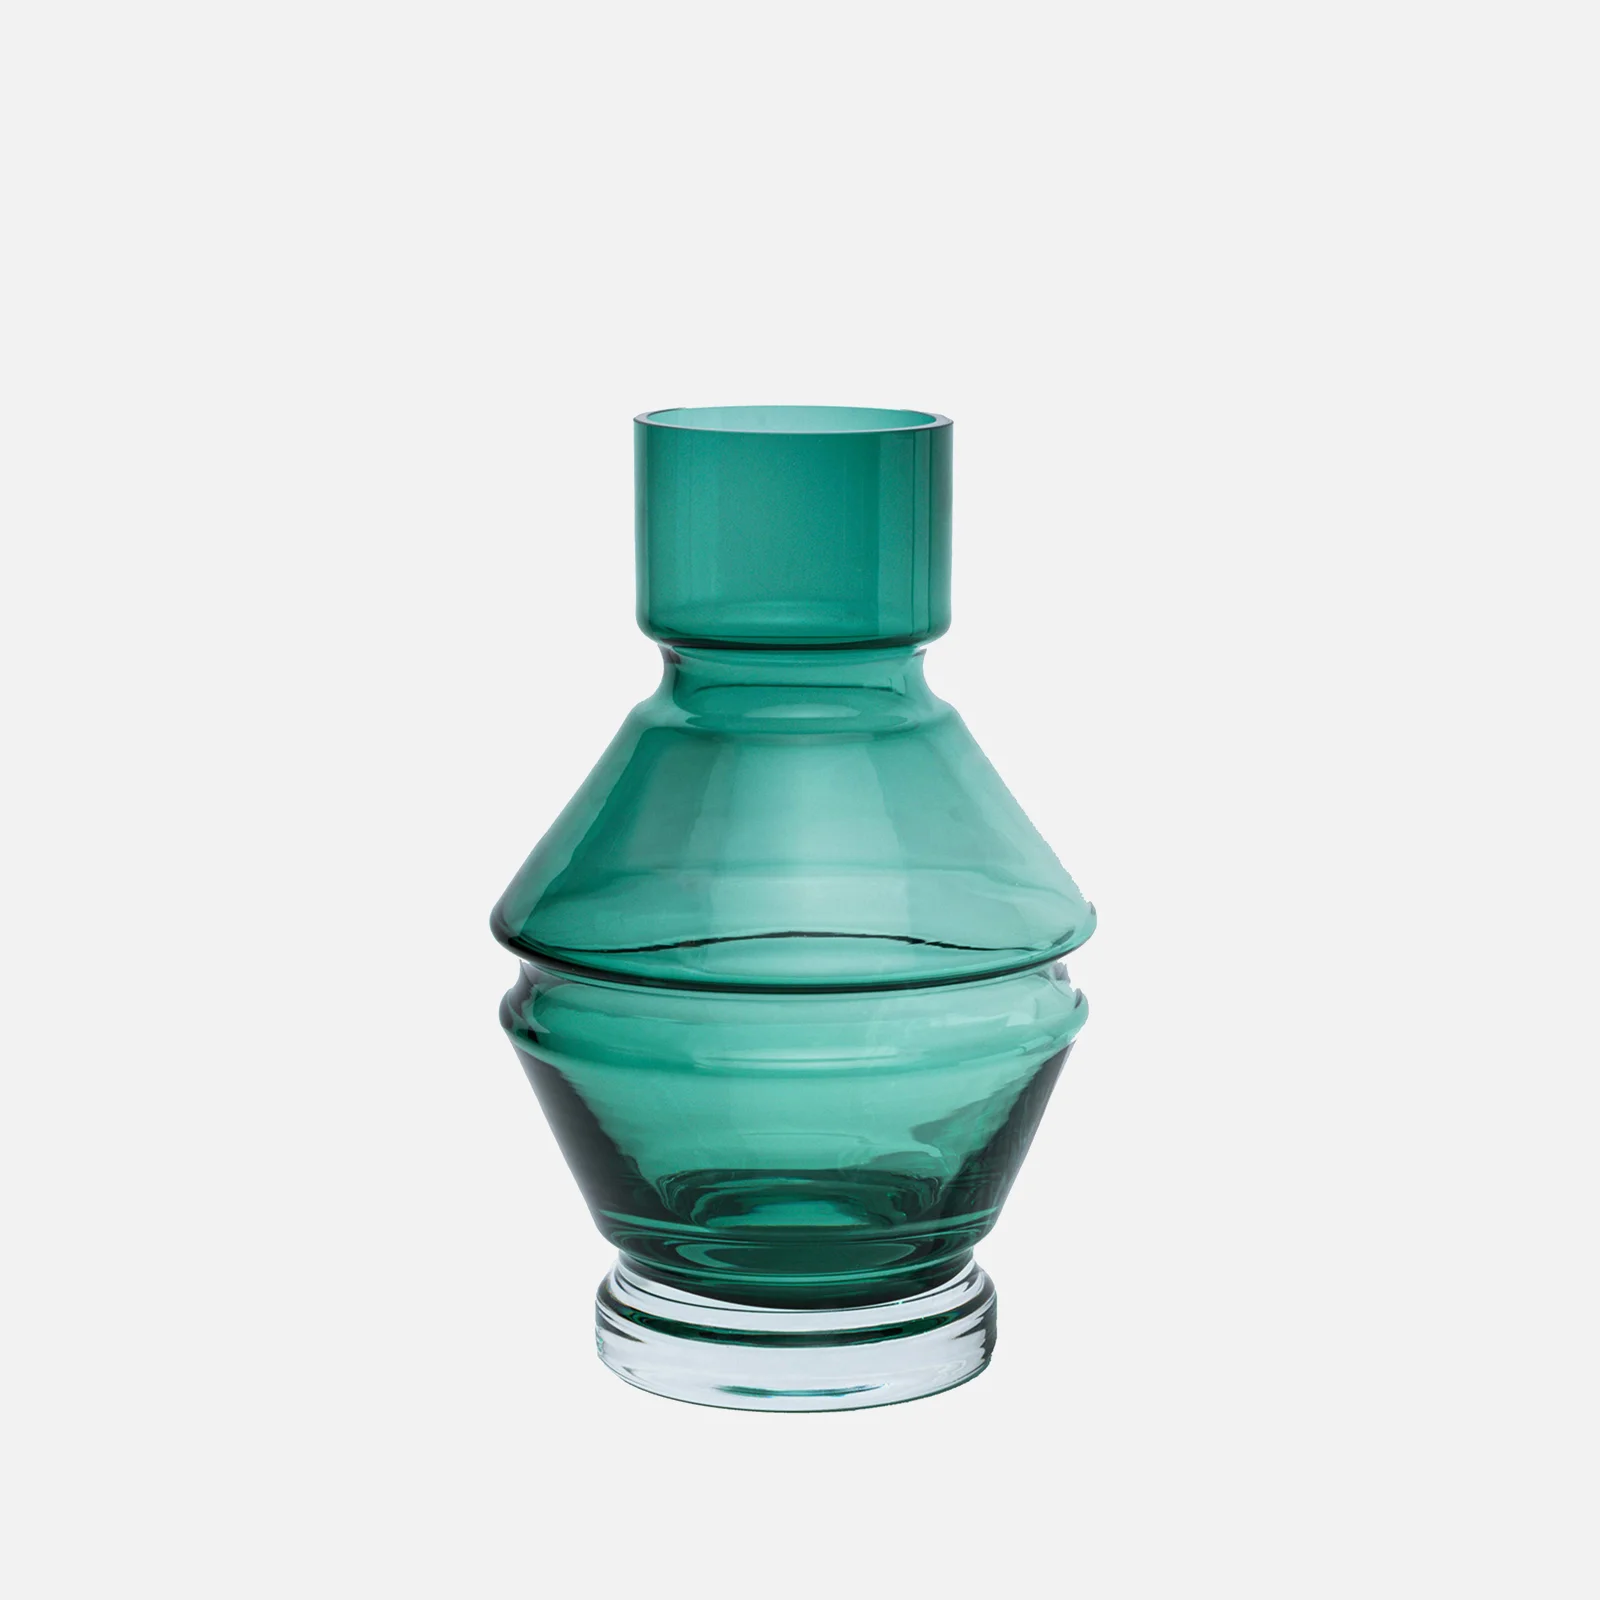 Raawii Relae Vase - Bristol Green - Small Image 1